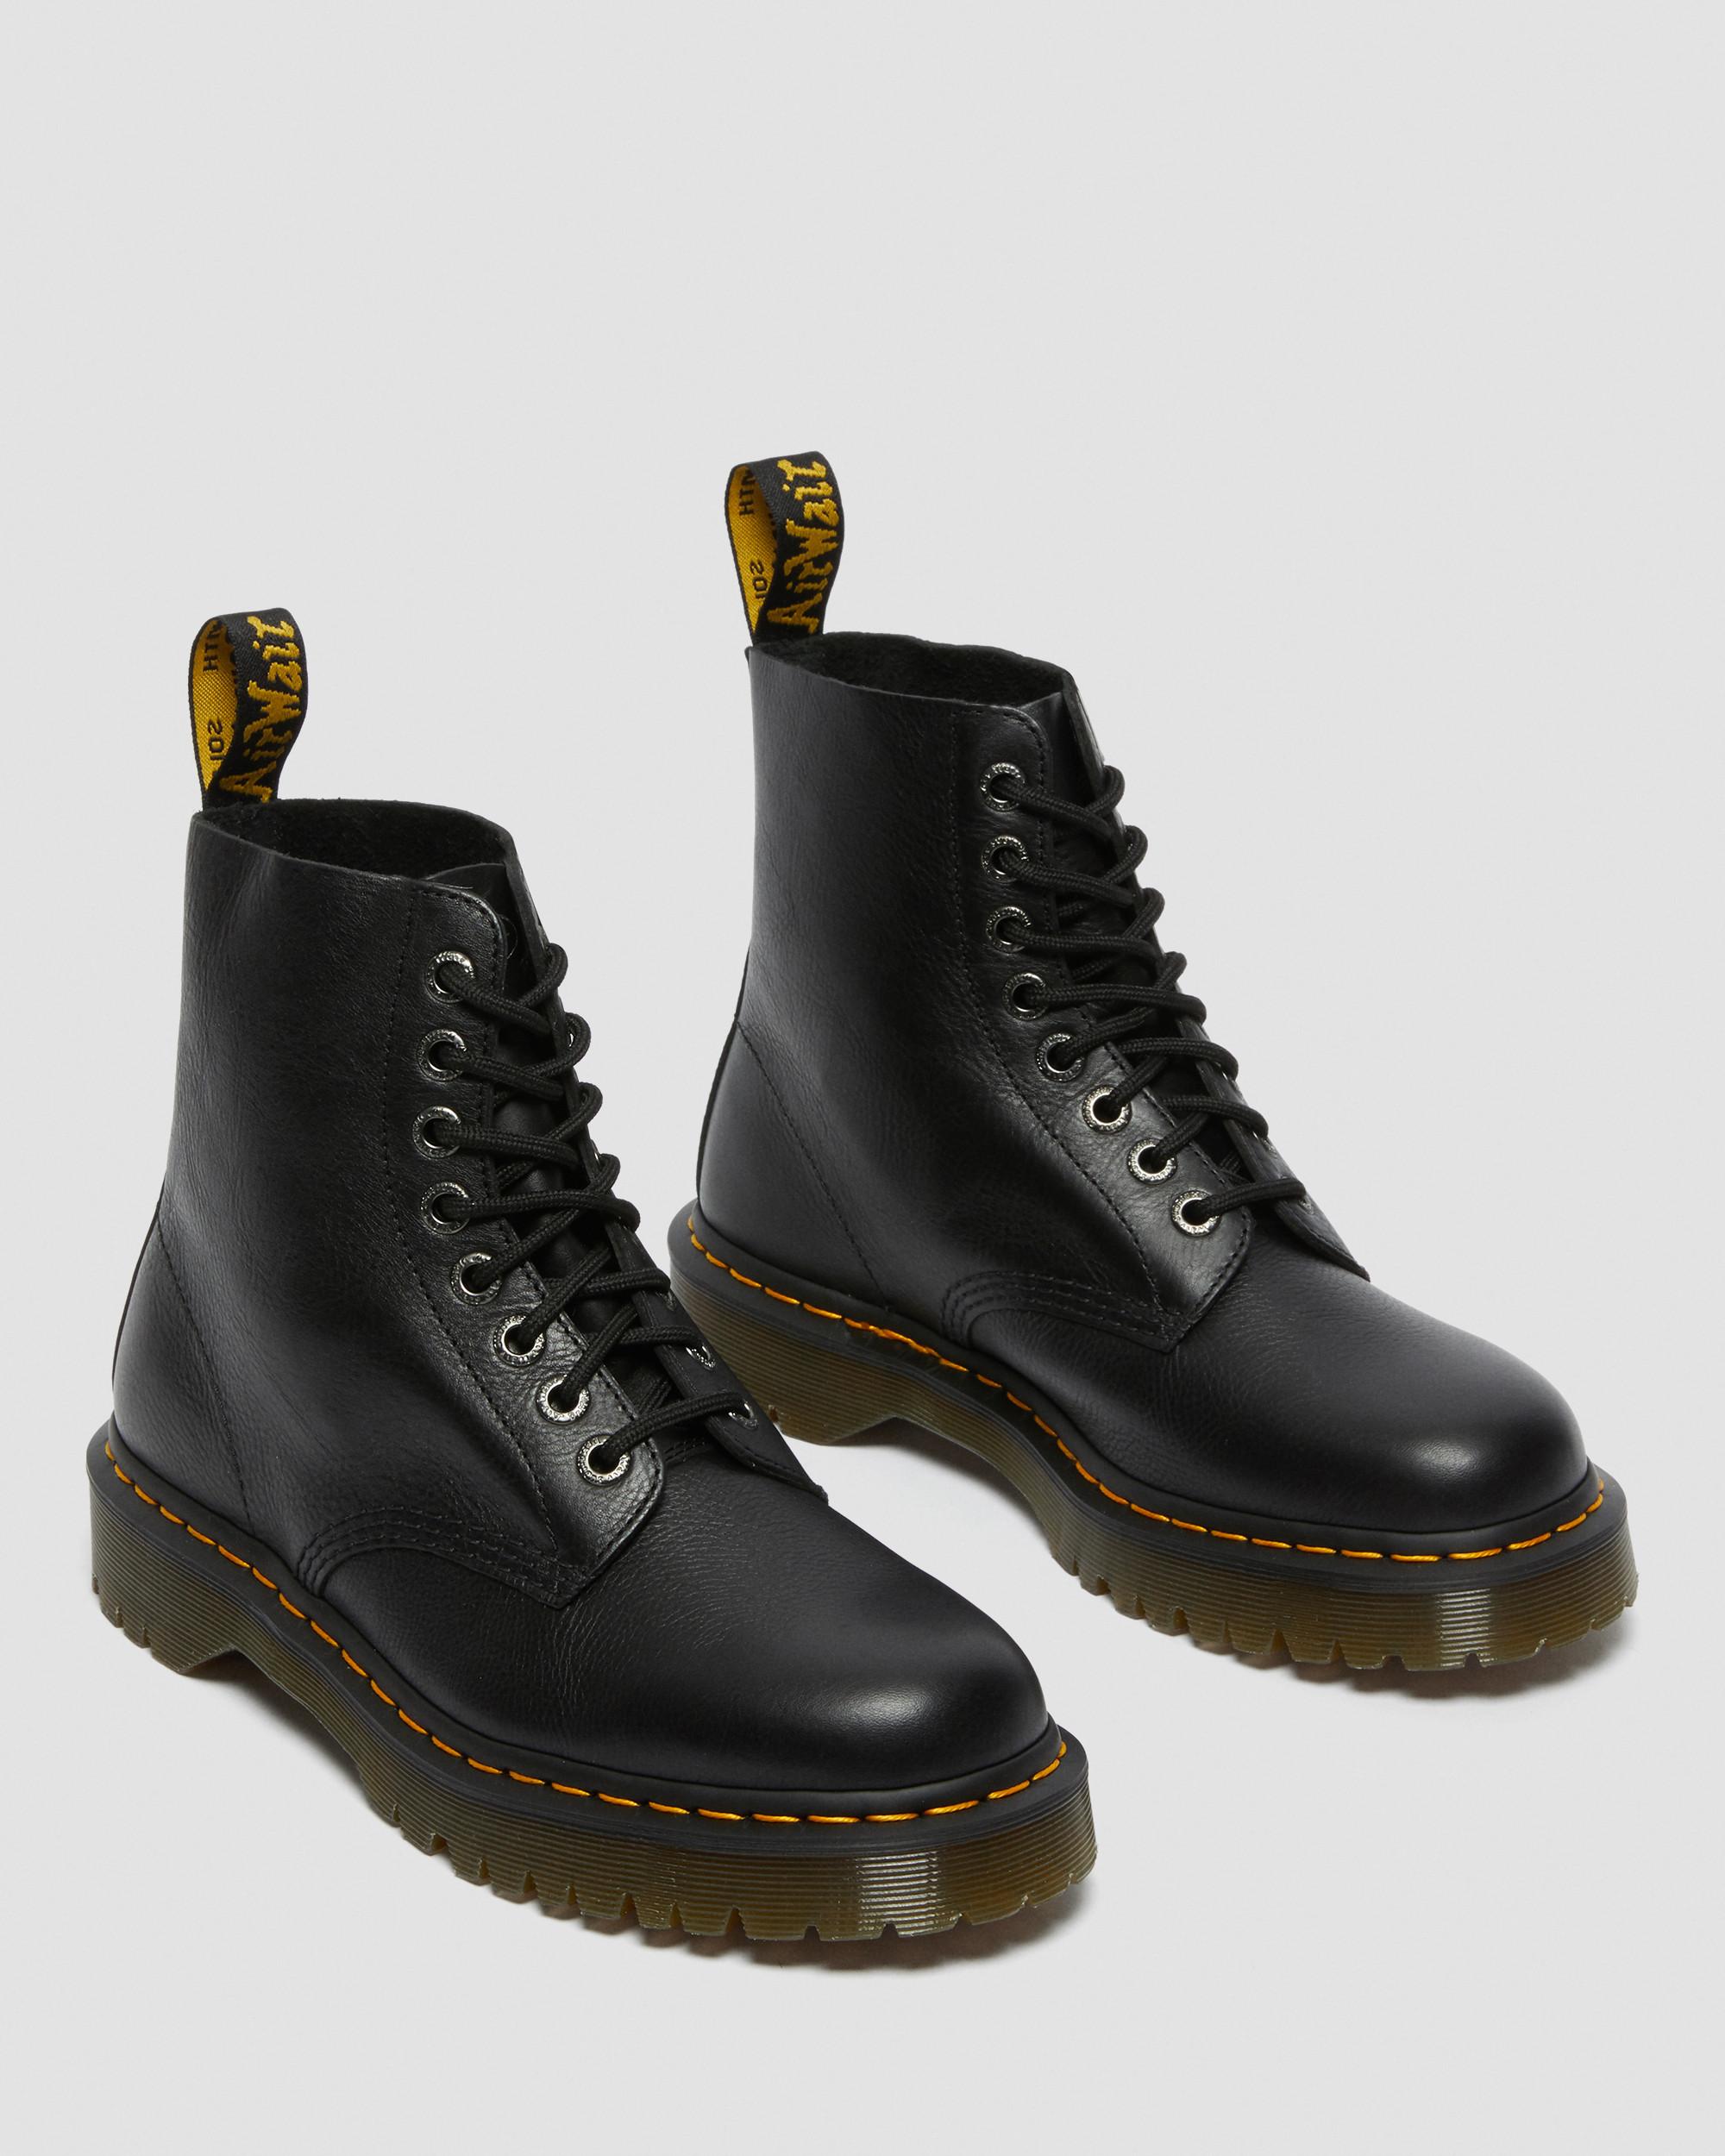 1460 PASCAL BEX LEATHER LACE UP BOOTS | Dr. Martens Official